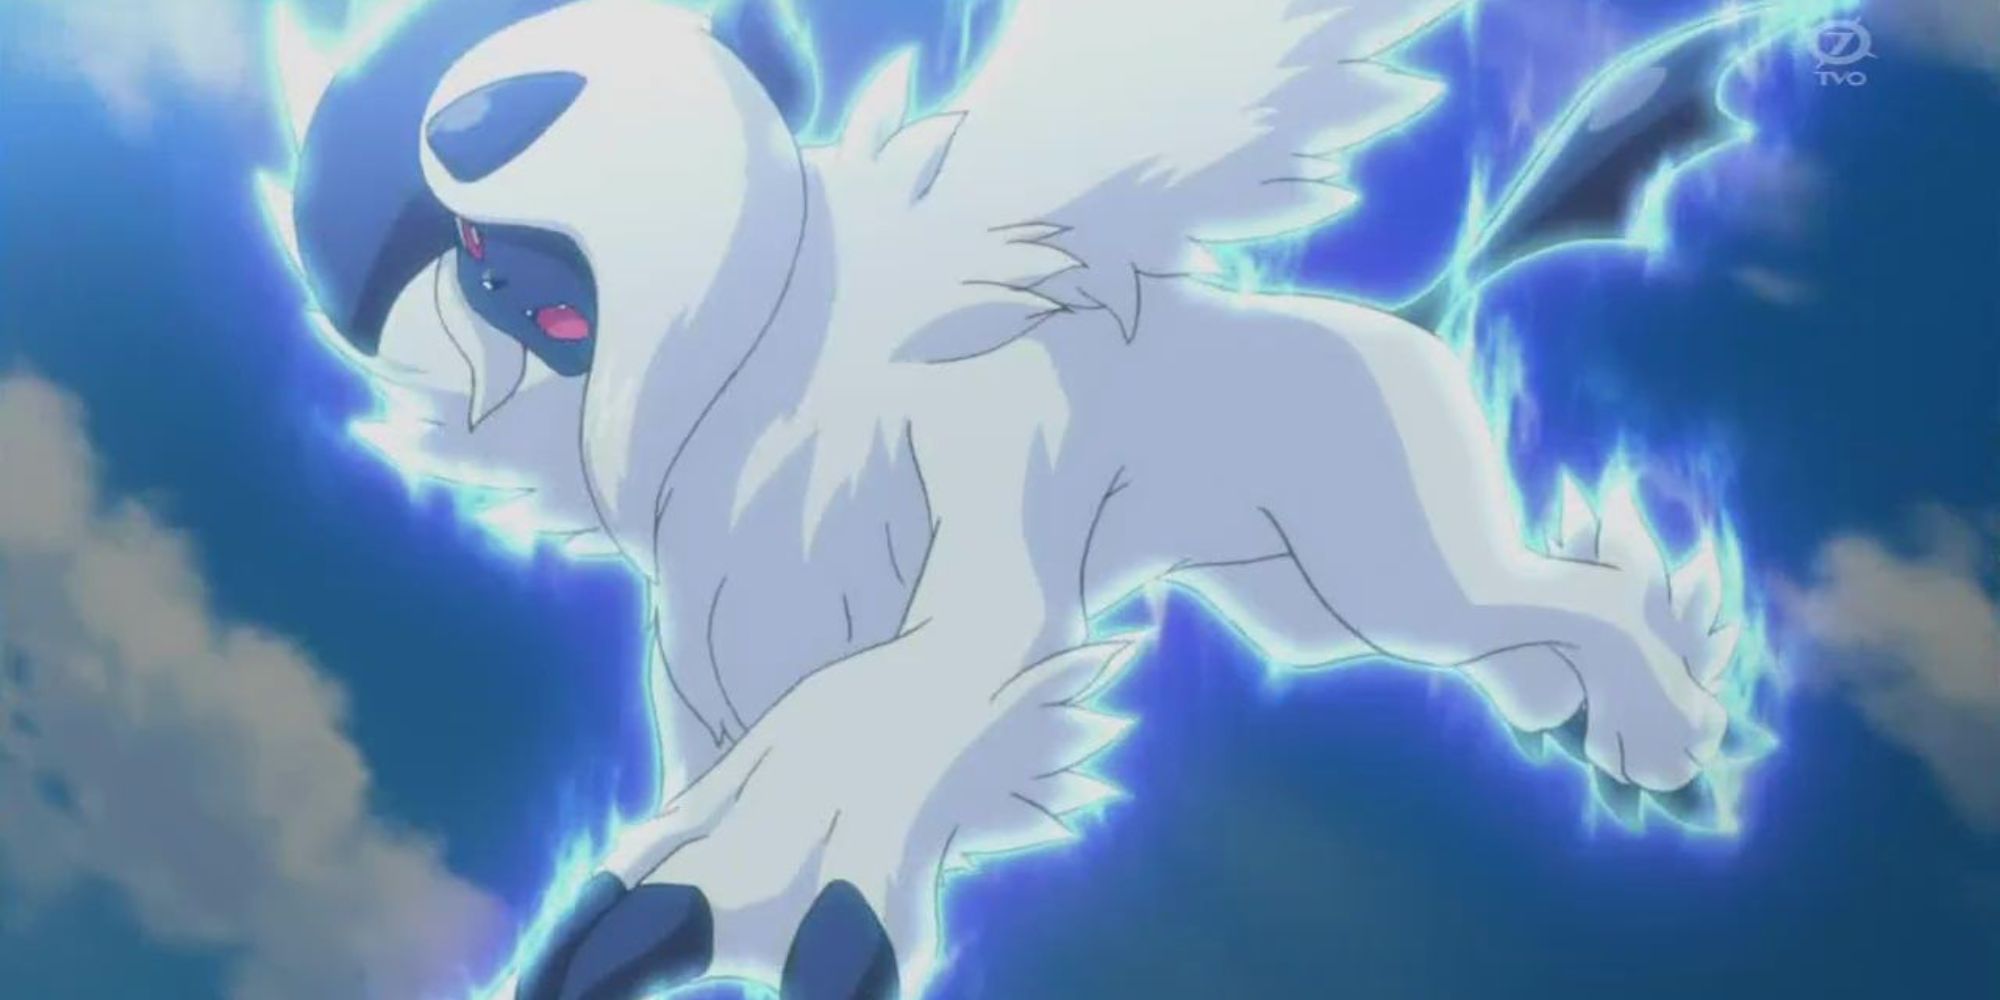 Mega Absol glows while jumping through the air in the Pokemon anime.